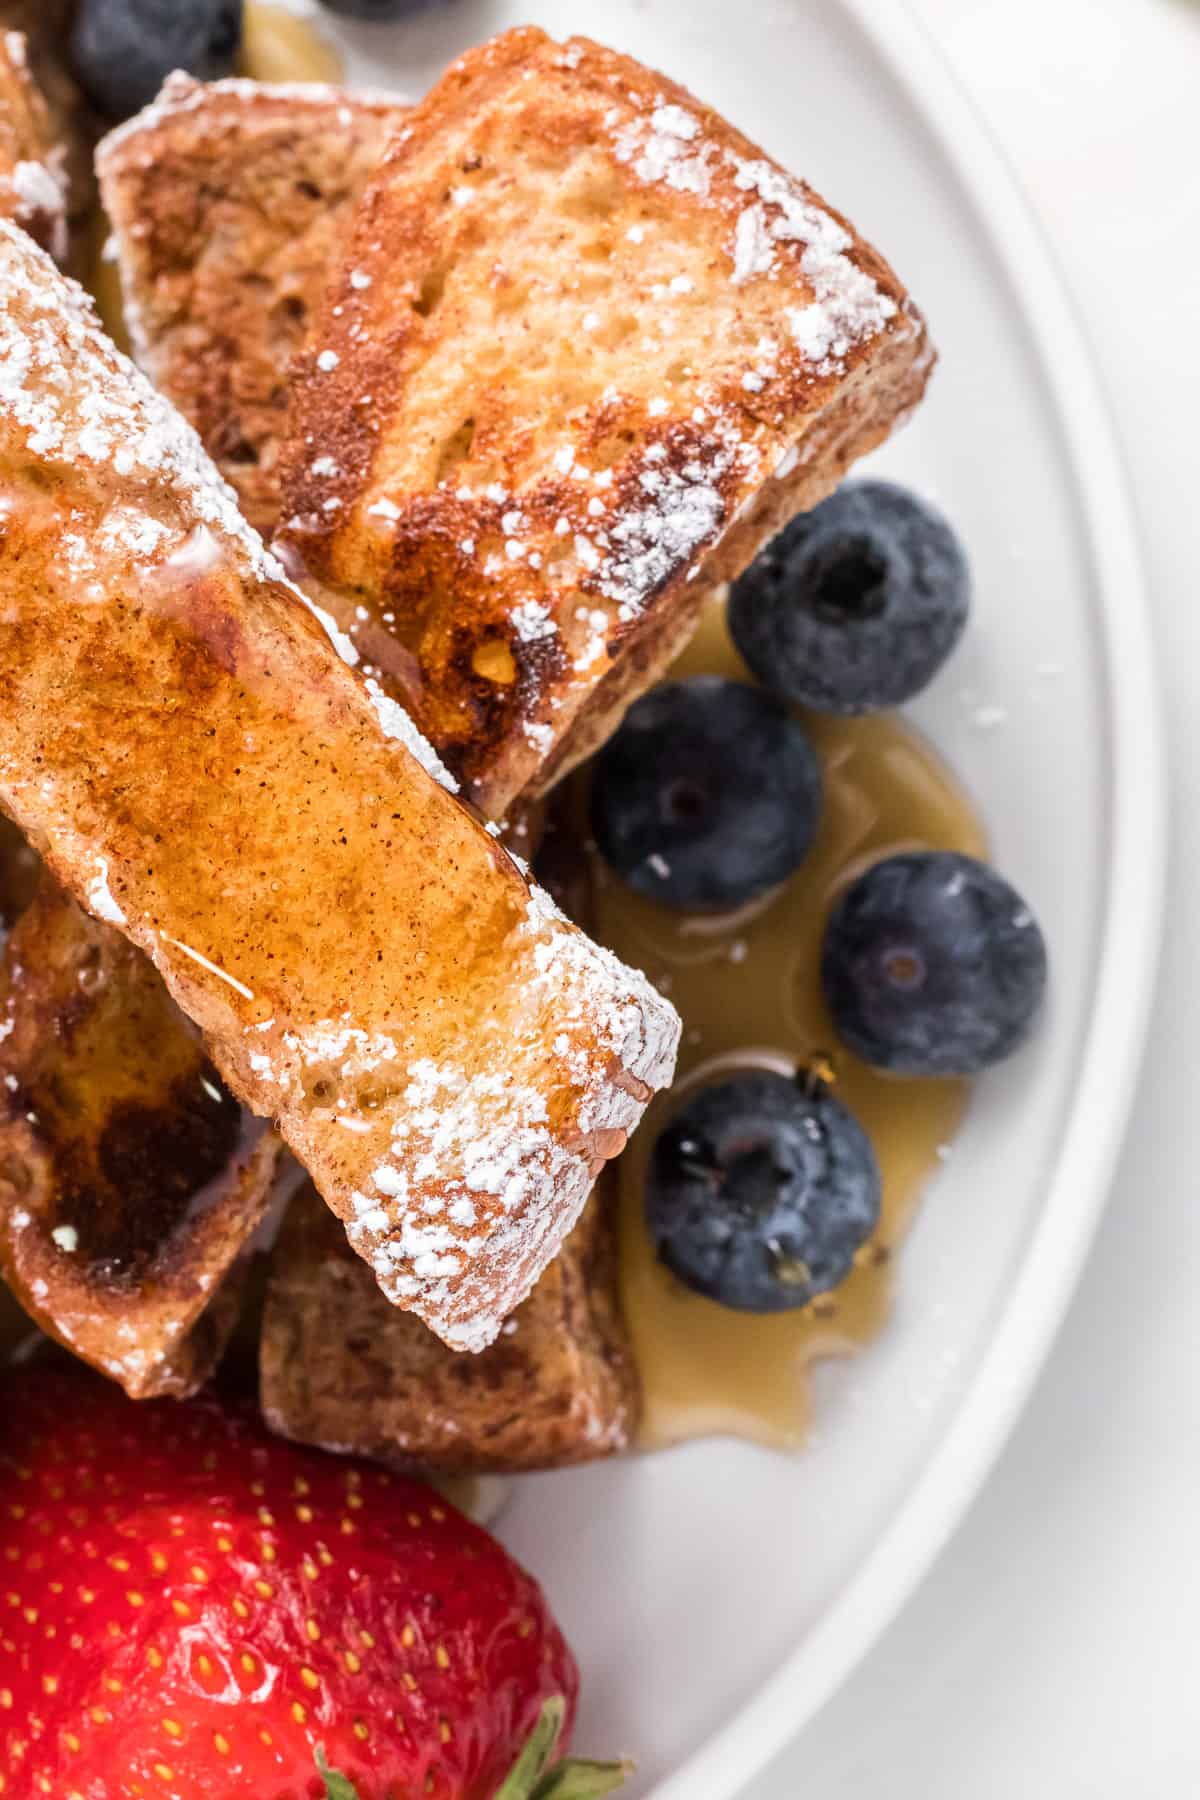 French toast sticks dusted with powdered sugar and drizzled with maple syrup.